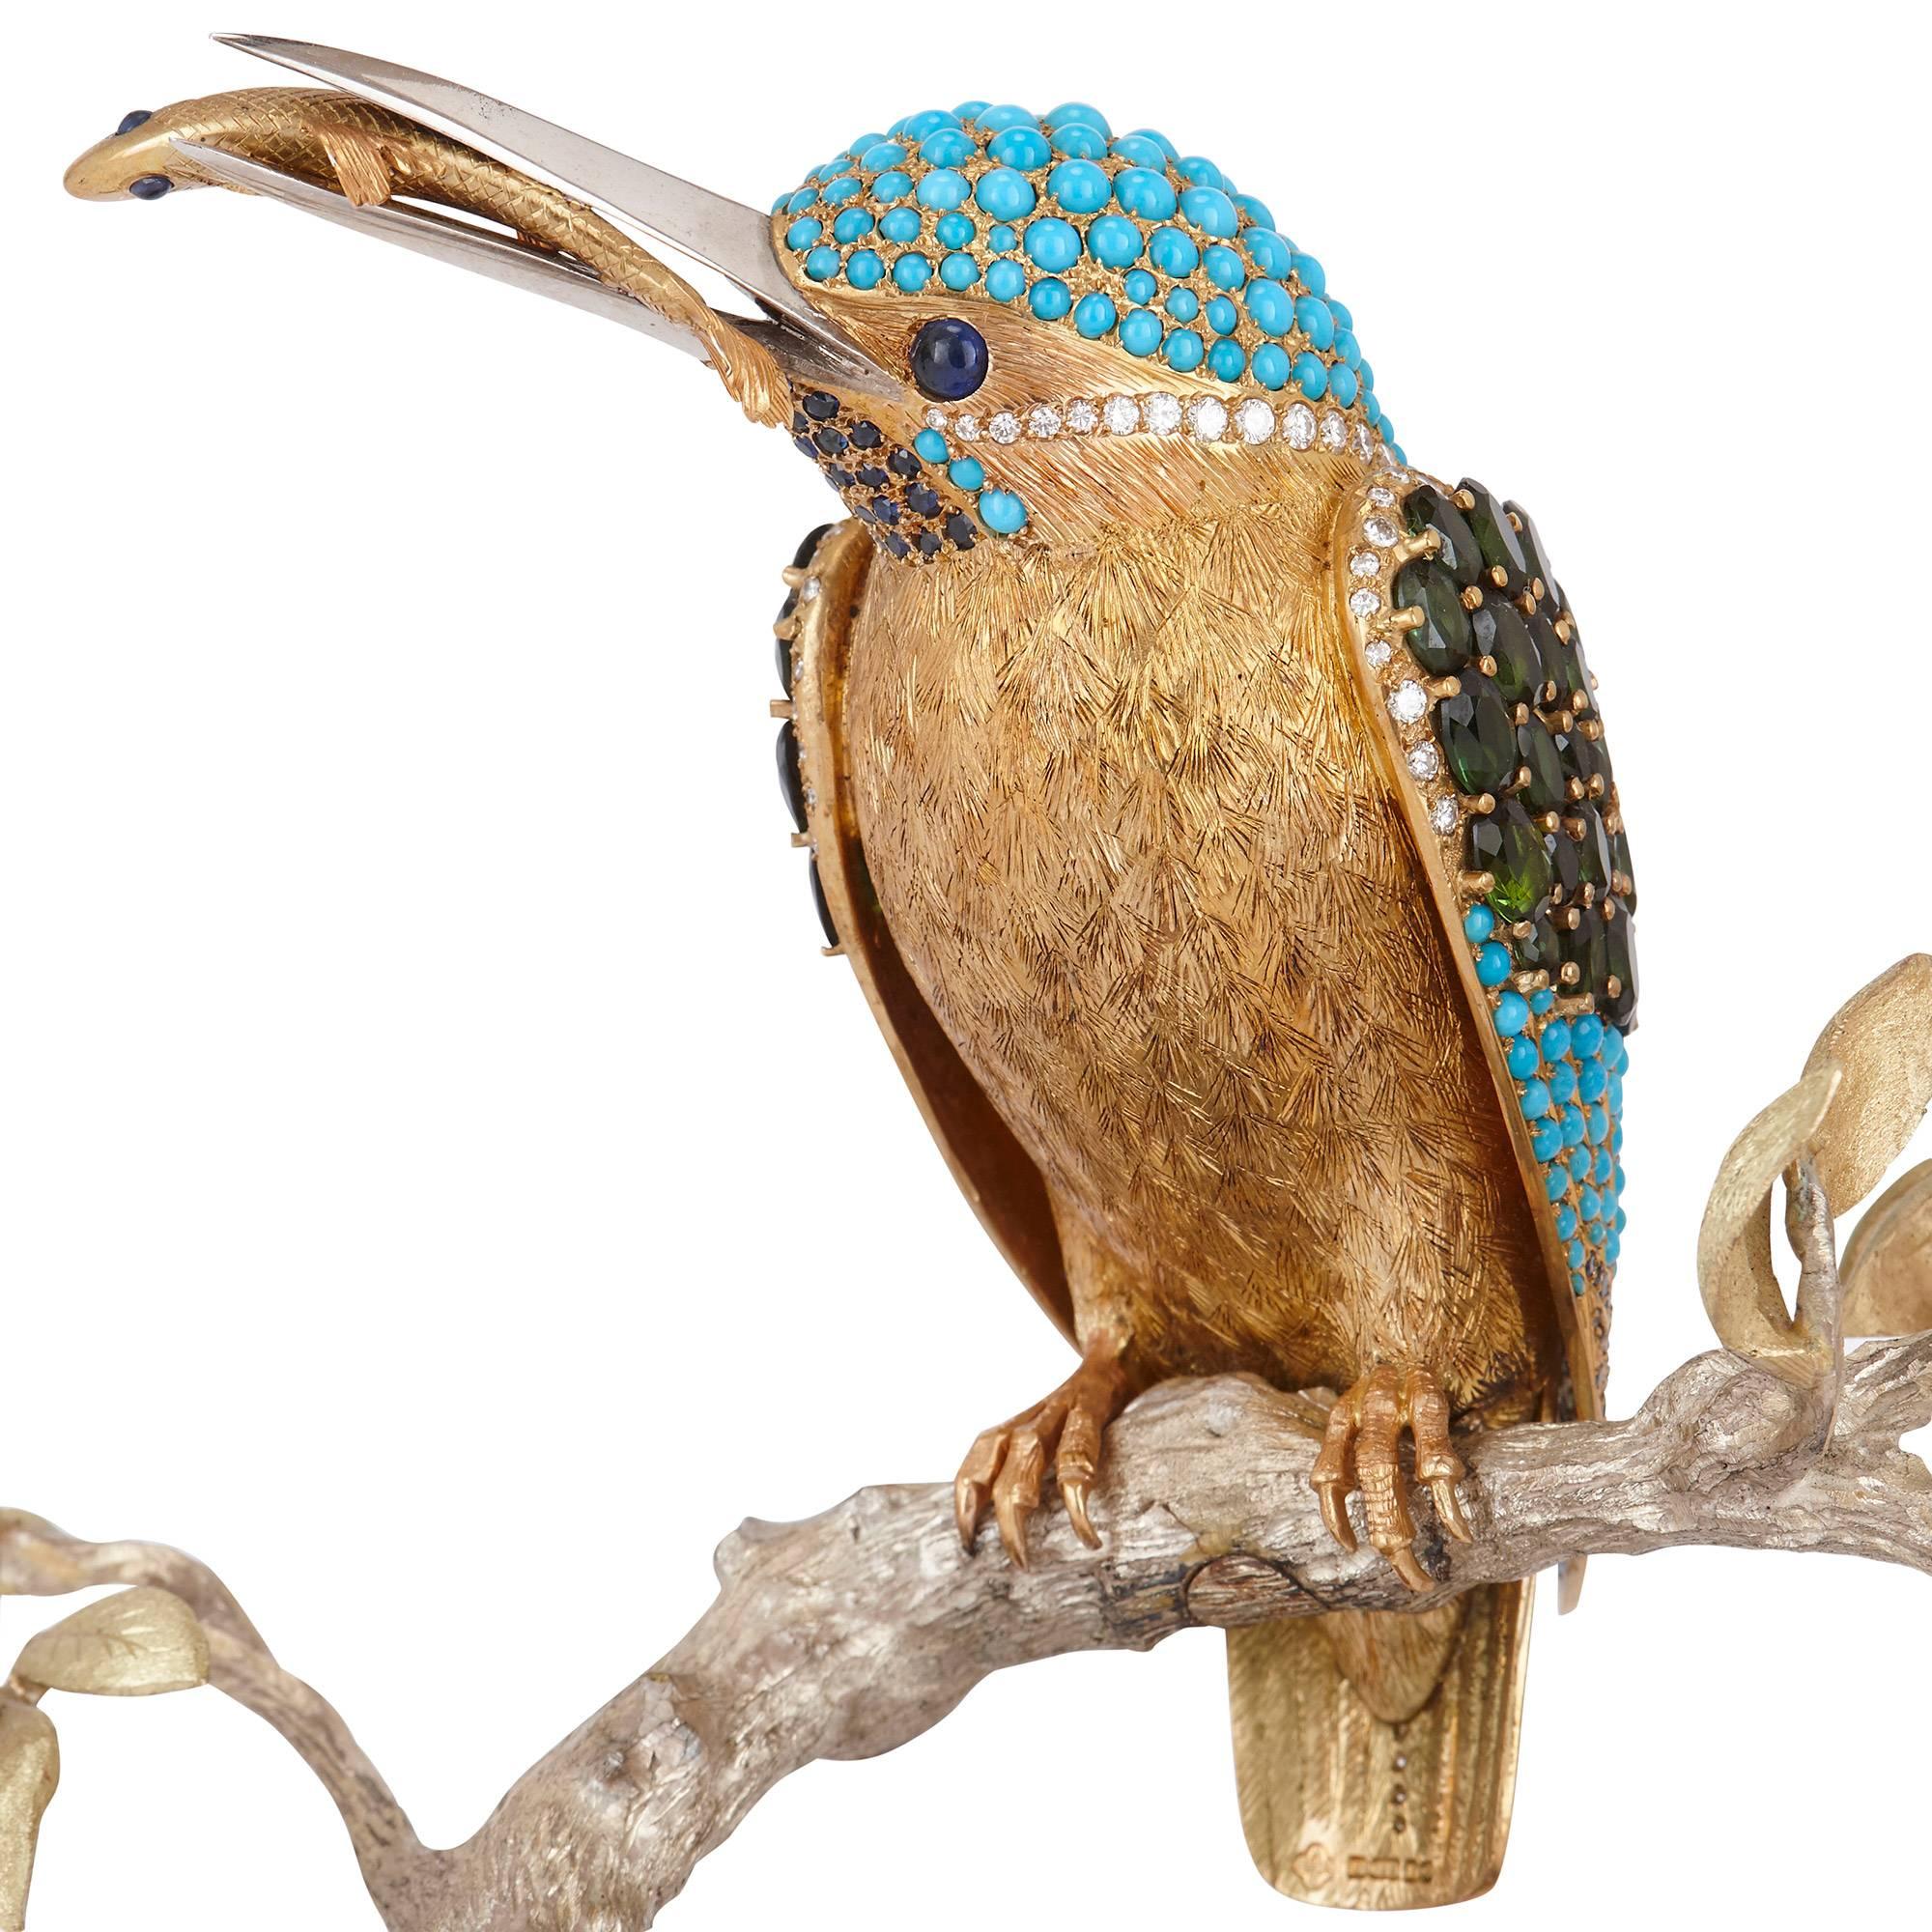 English Gold and Gemstone Mounted Kingfisher Ornament by Asprey